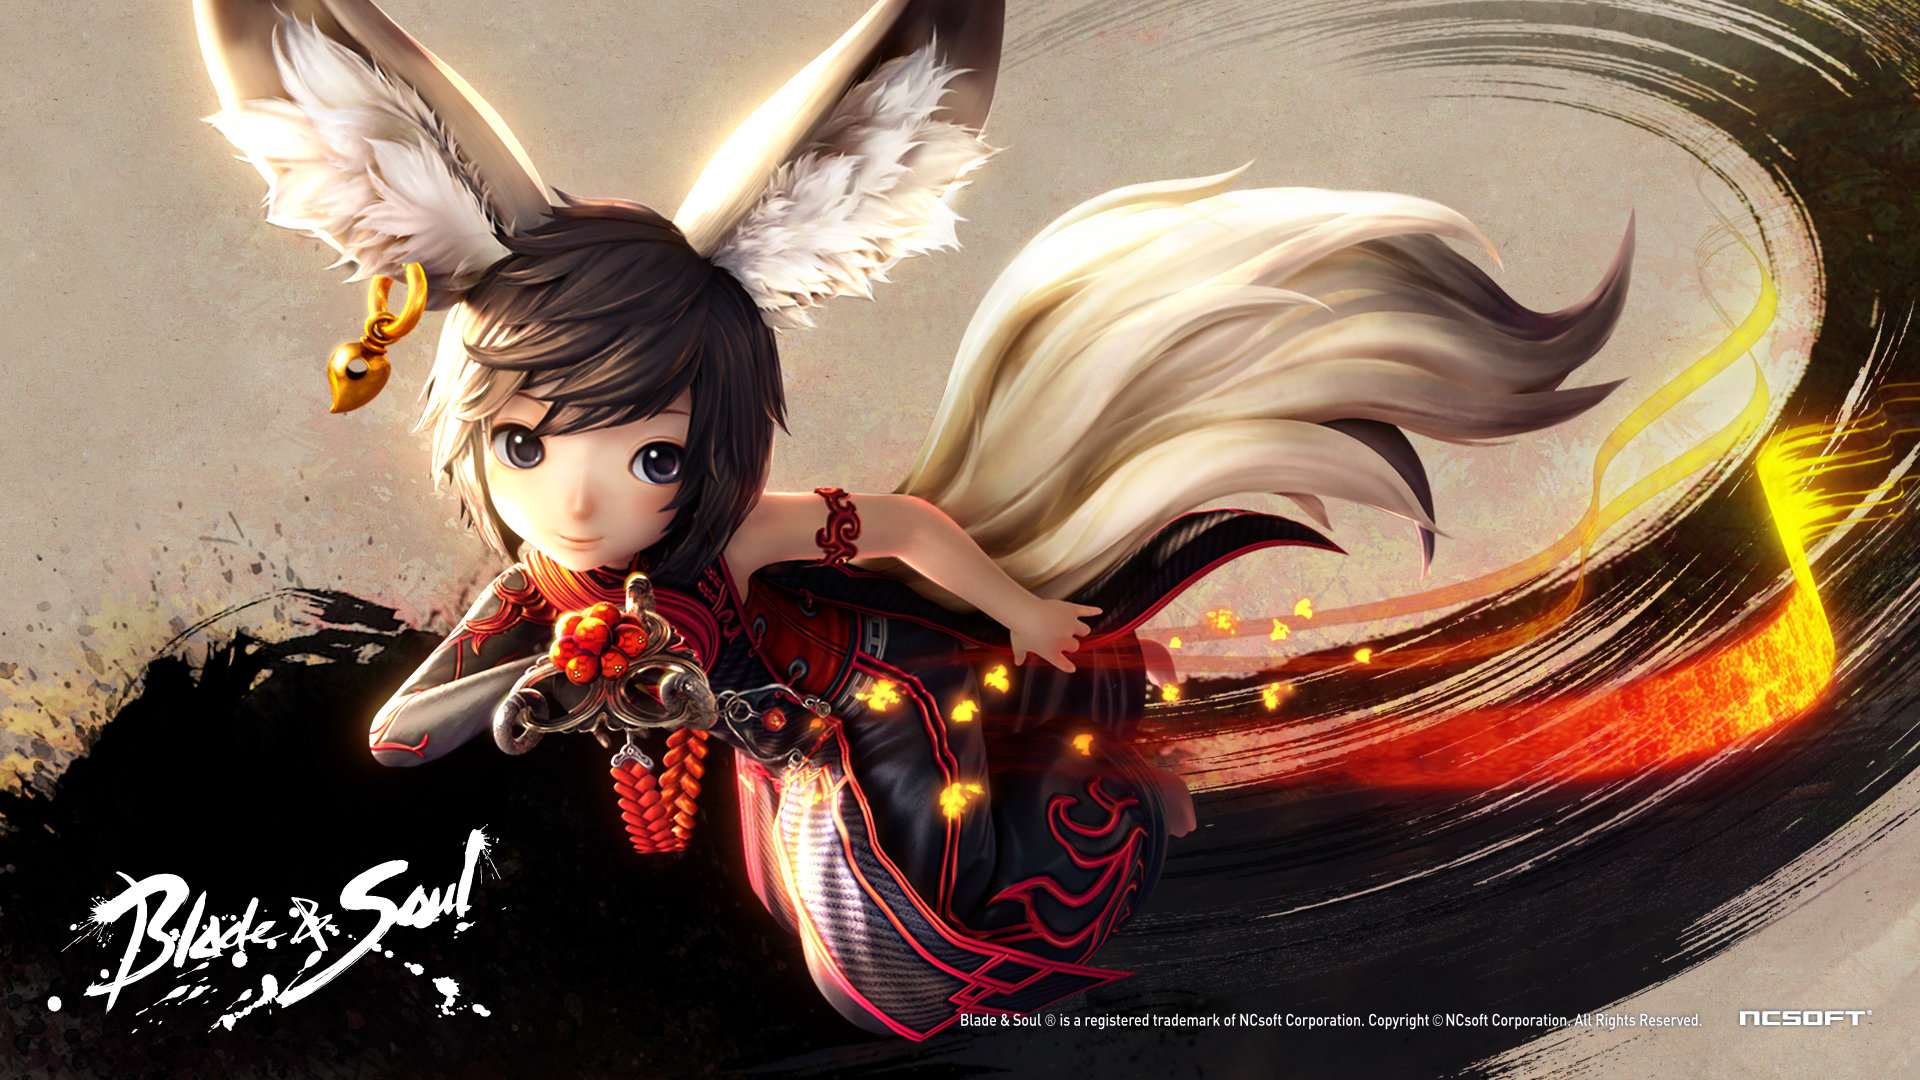 Blade and soul download pc free